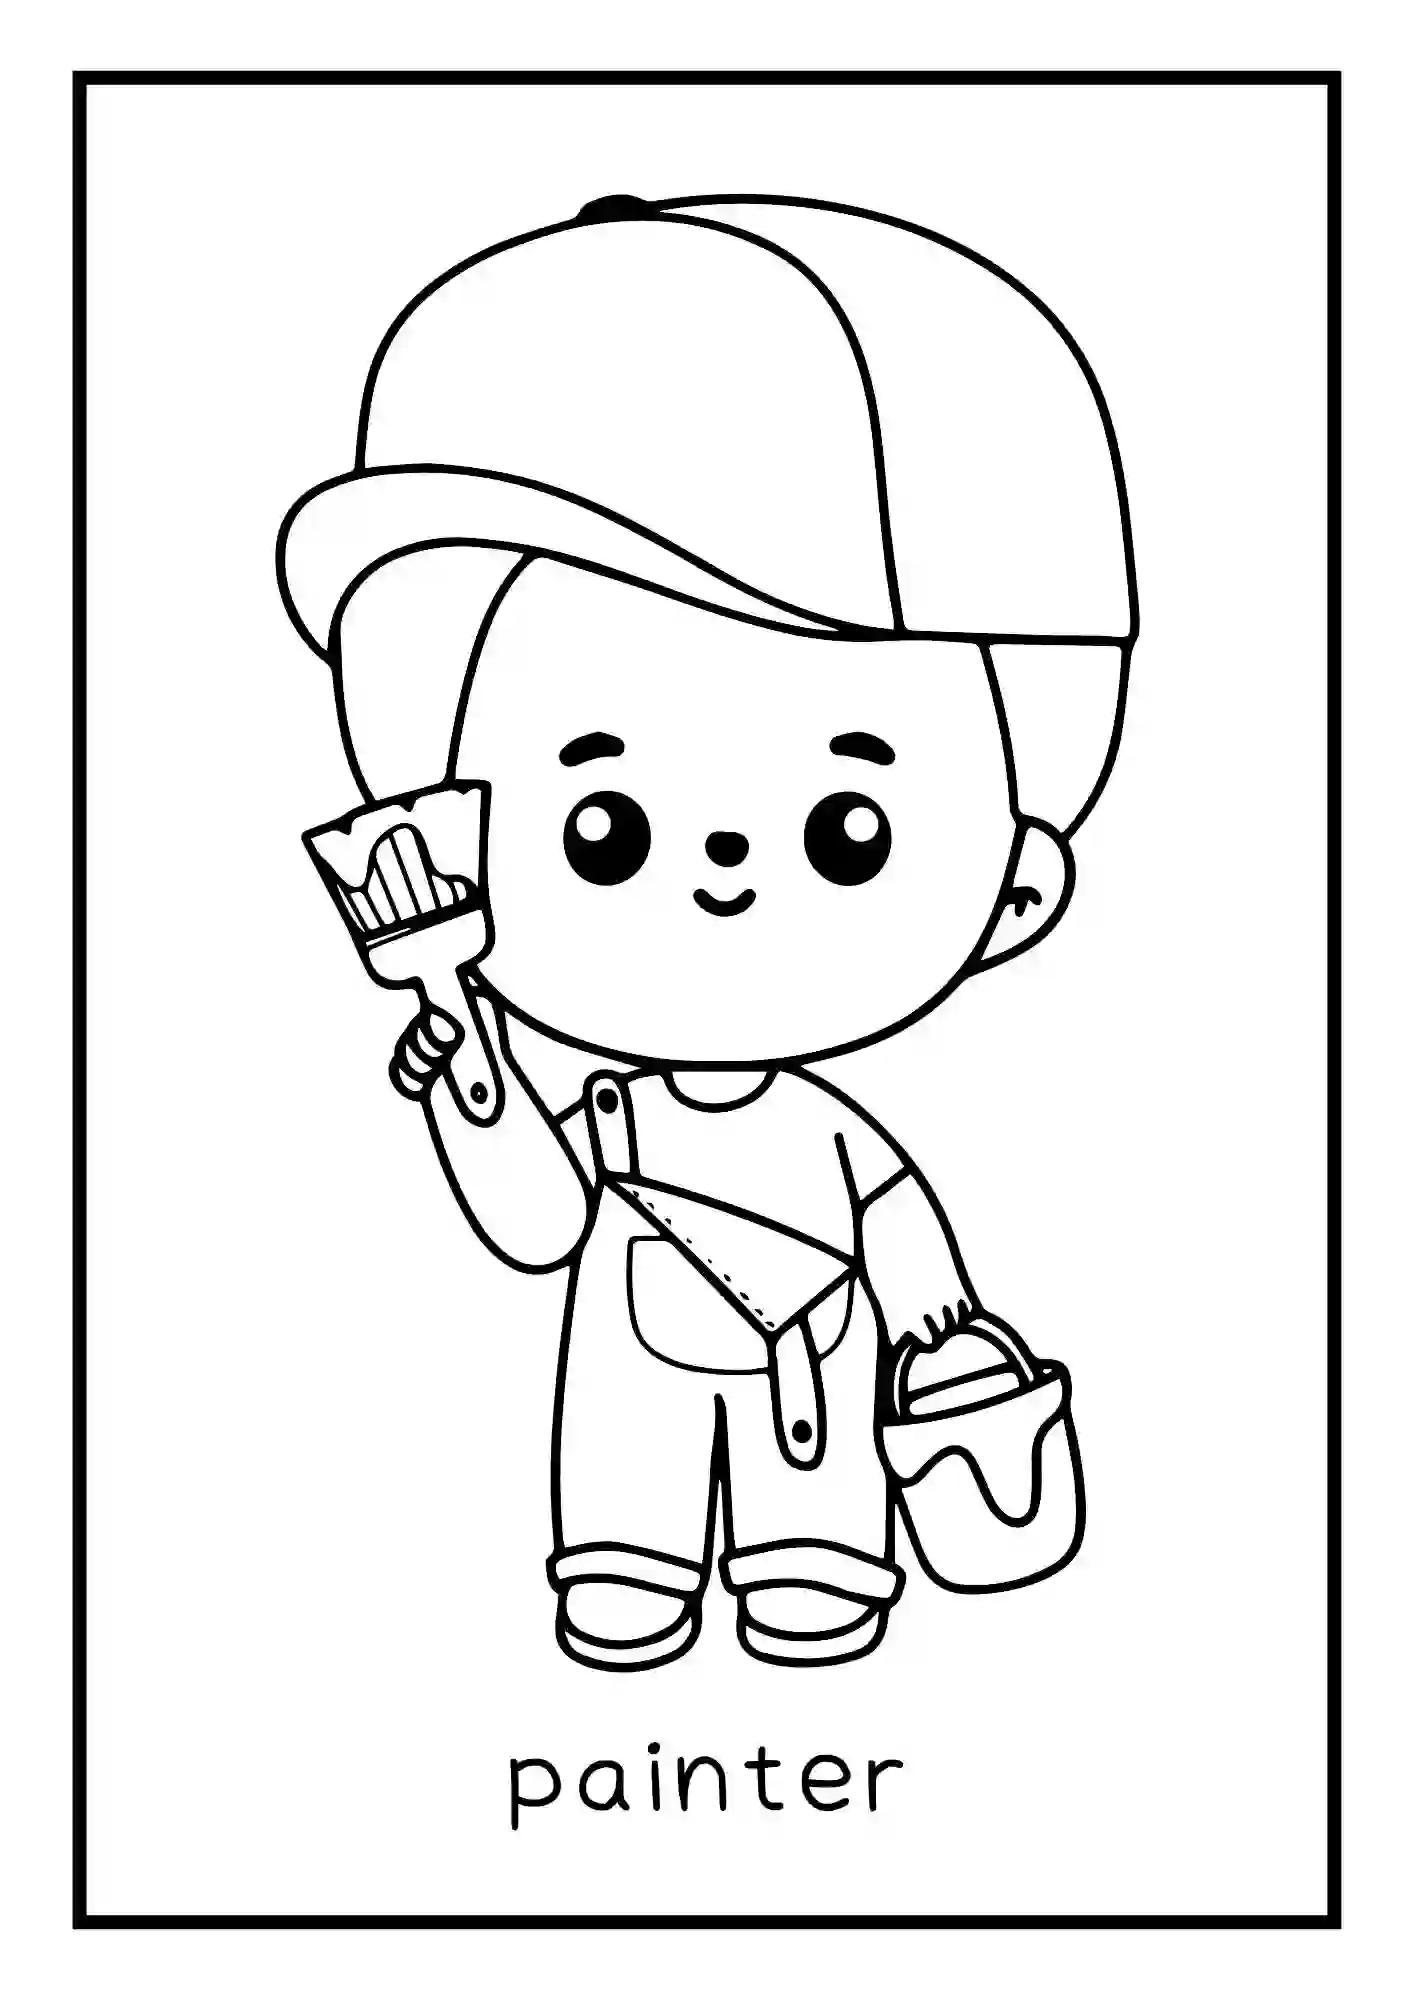 Different Professions, occupations, carriers, jobs, Coloring Worksheets (painter)